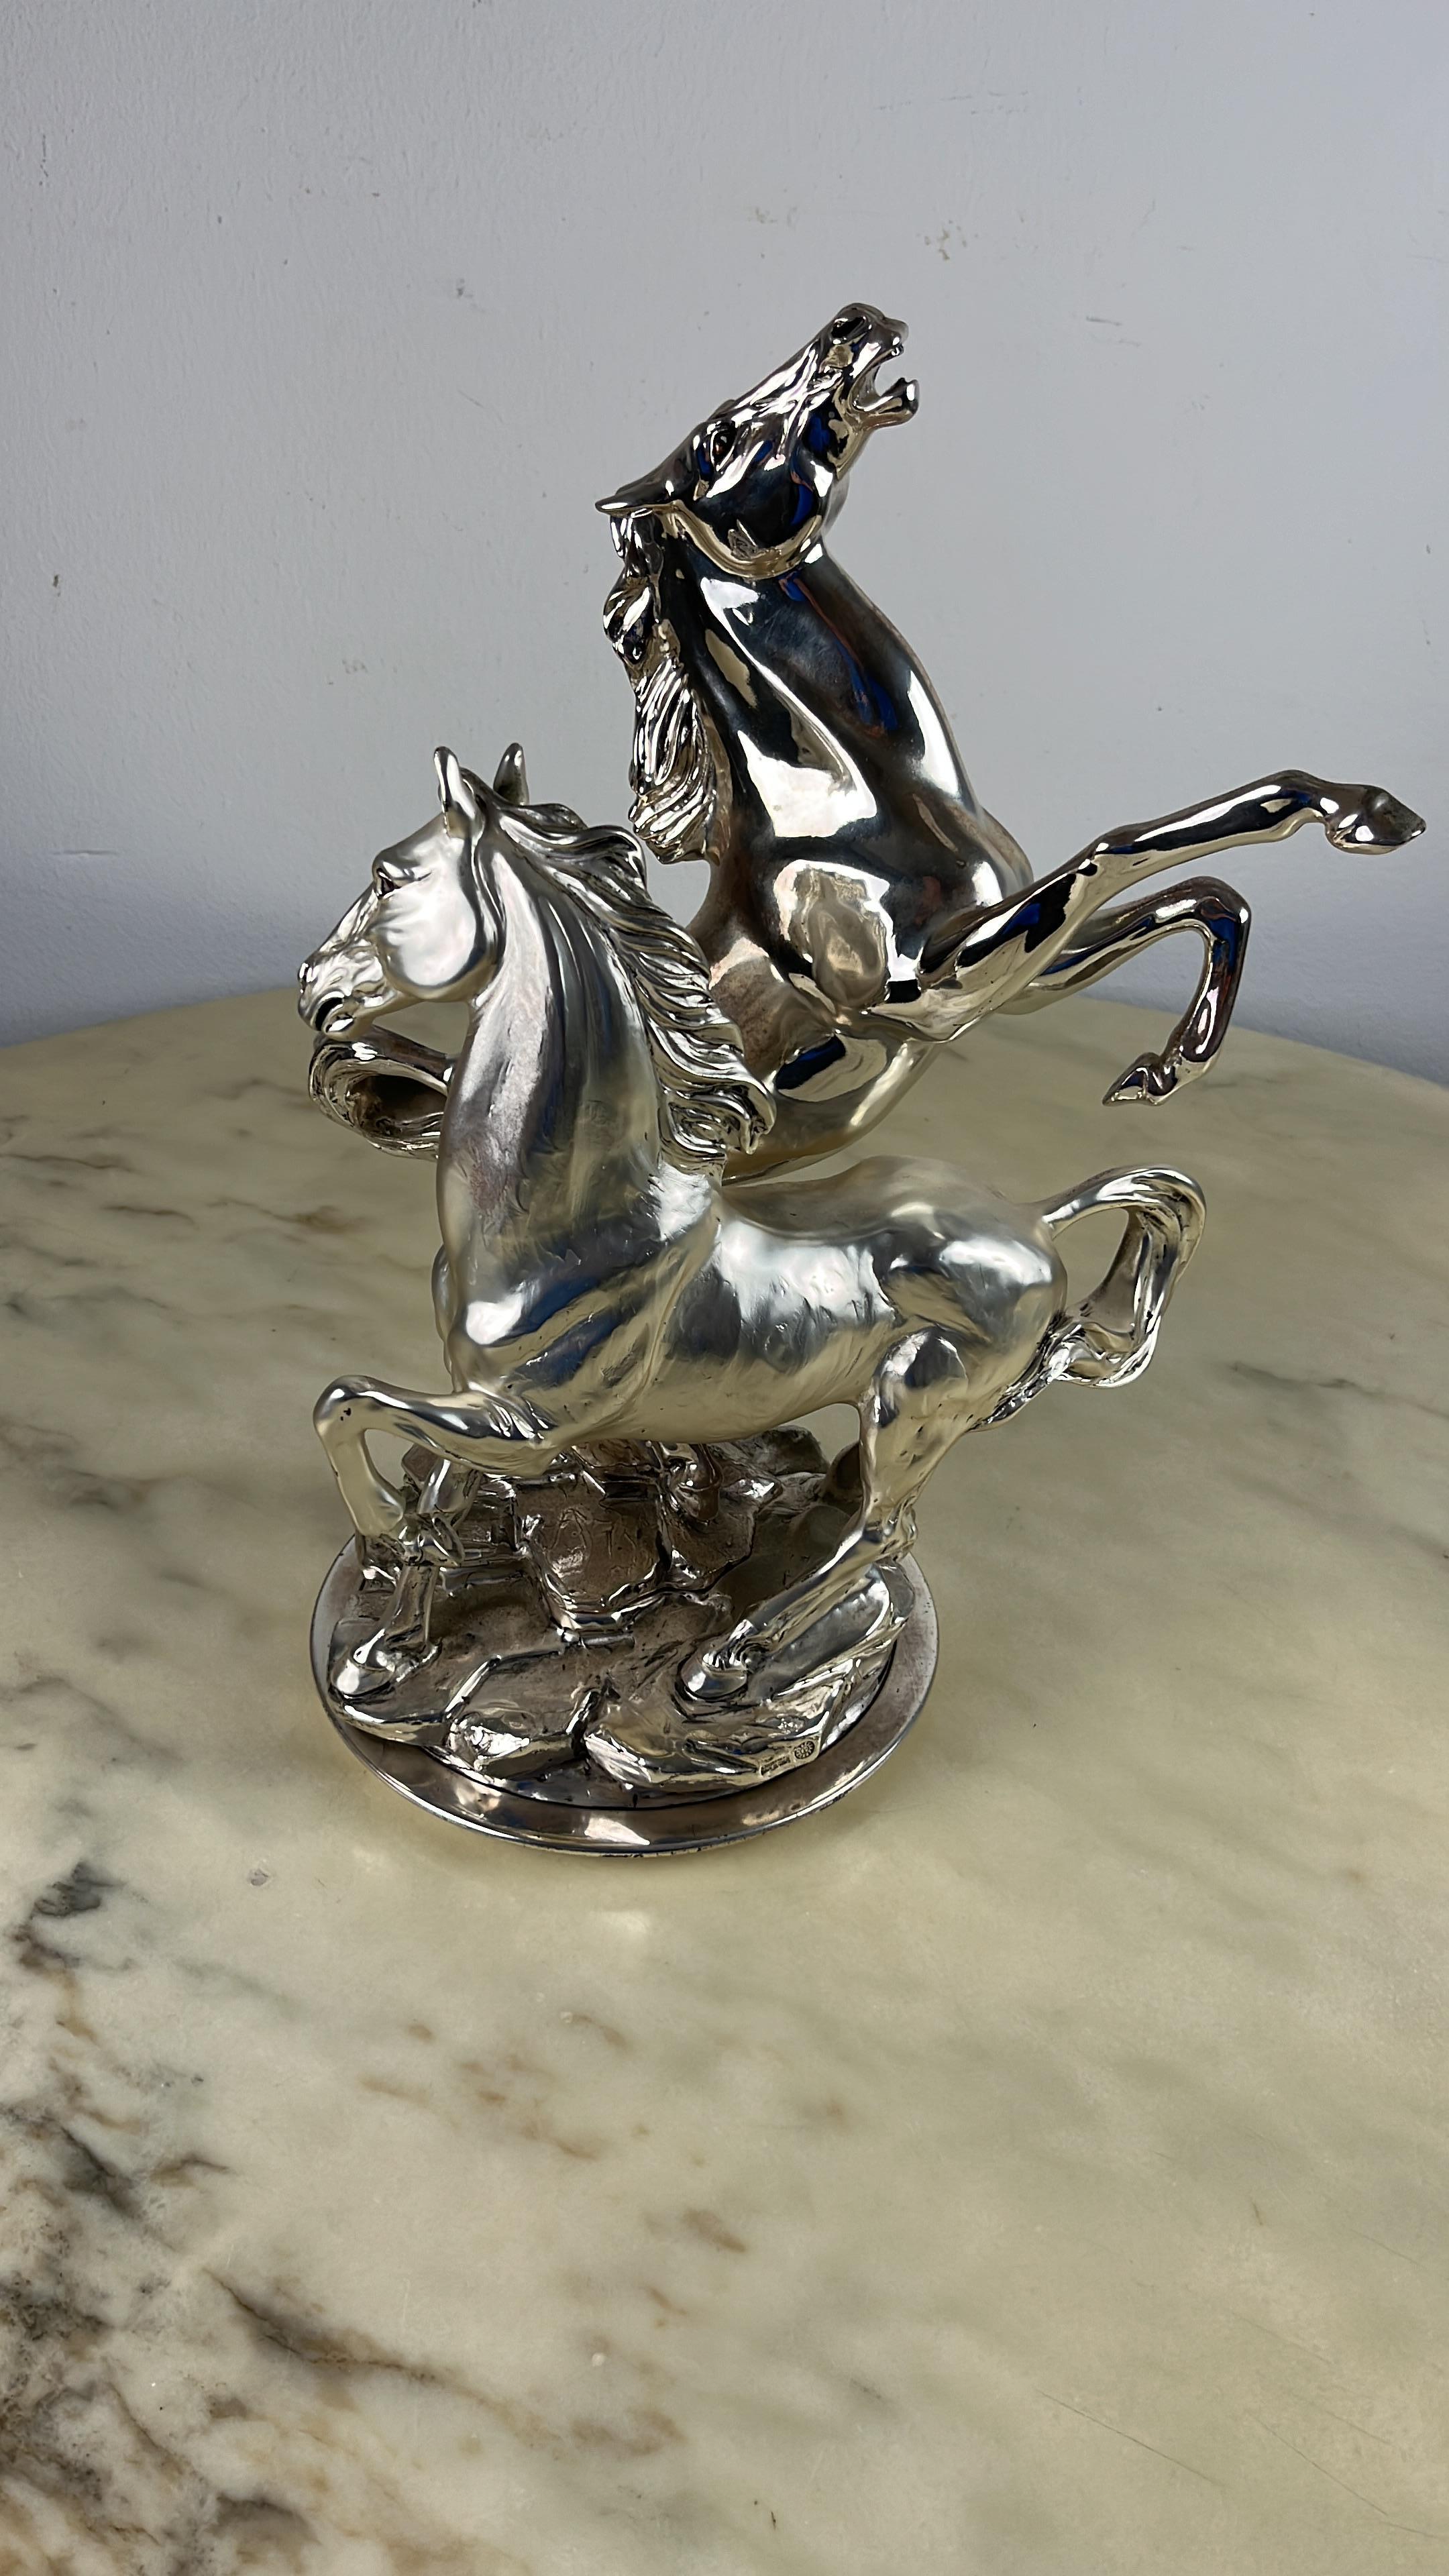 Large Vintage sculpture in rolled silver, Italy, 1980s
Graduation gift from my grandfather, good condition. 43 cm high. The widest part measures 30 cm.